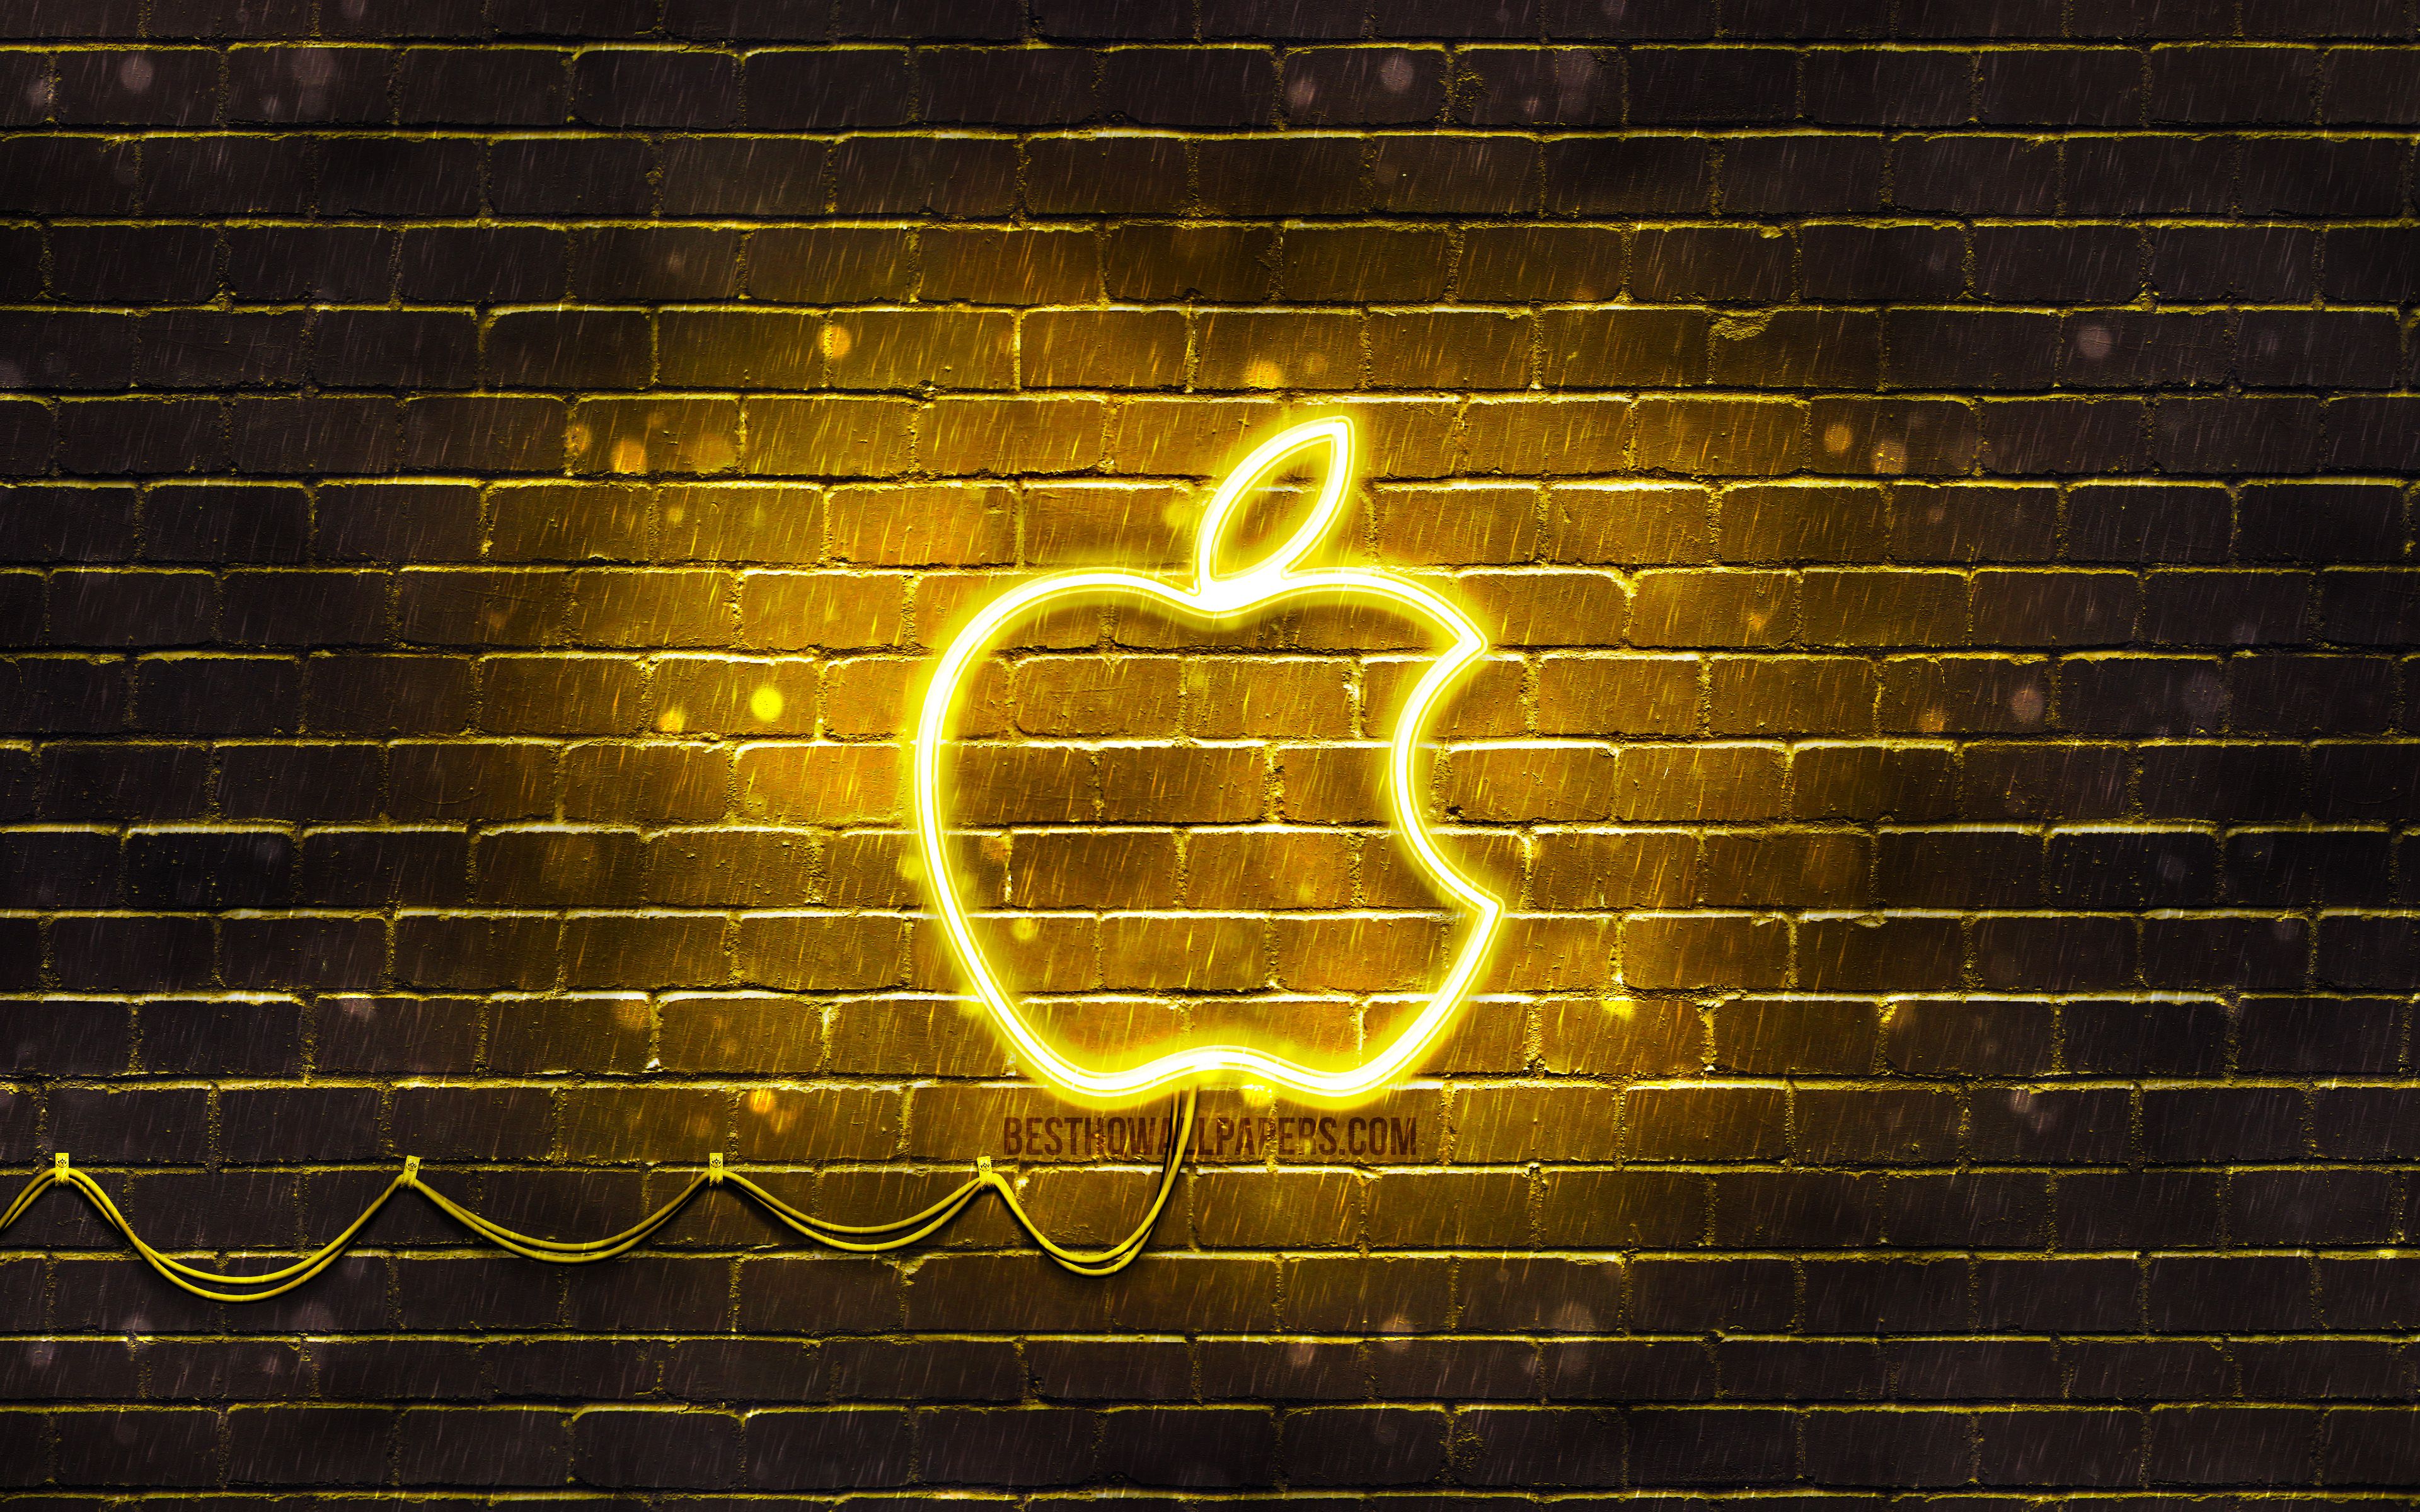 Download wallpaper Apple yellow logo, 4k, yellow brickwall, yellow neon apple, Apple logo, brands, Apple neon logo, Apple for desktop with resolution 3840x2400. High Quality HD picture wallpaper